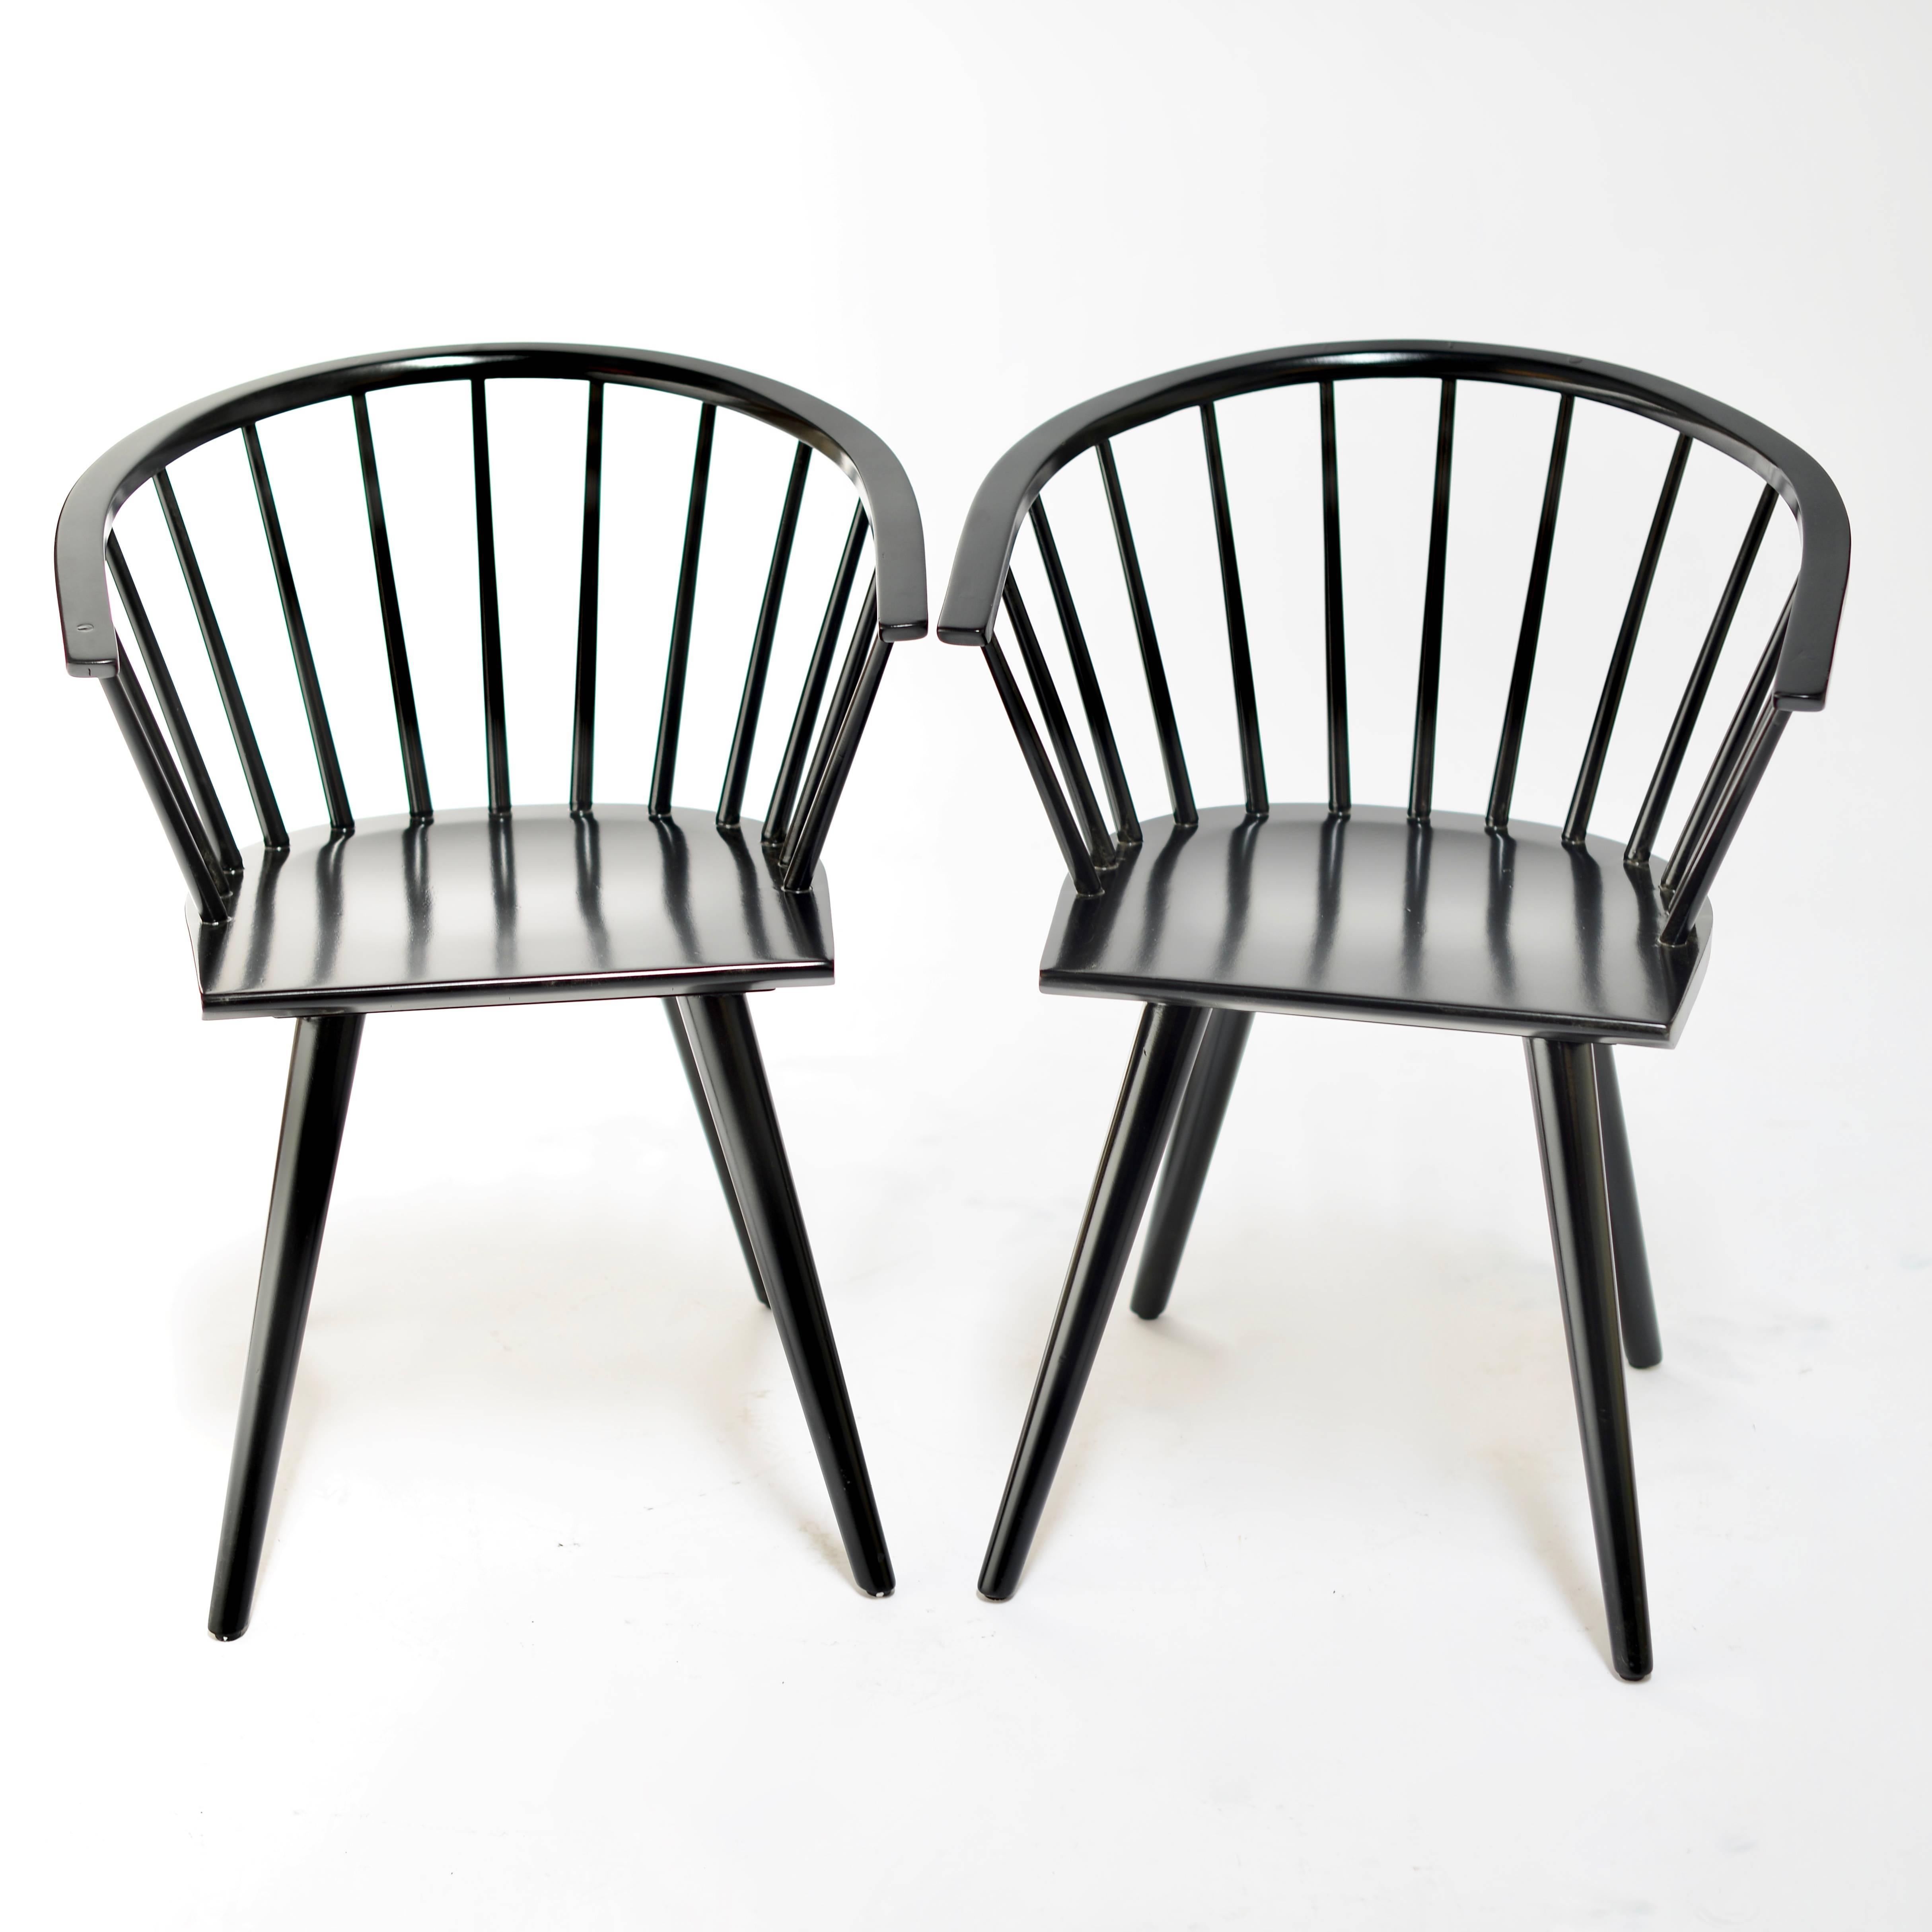 Set of two Windsor inspired chairs by Russel Wright for Conant Ball Company. Newly refinished in Ebony.
 